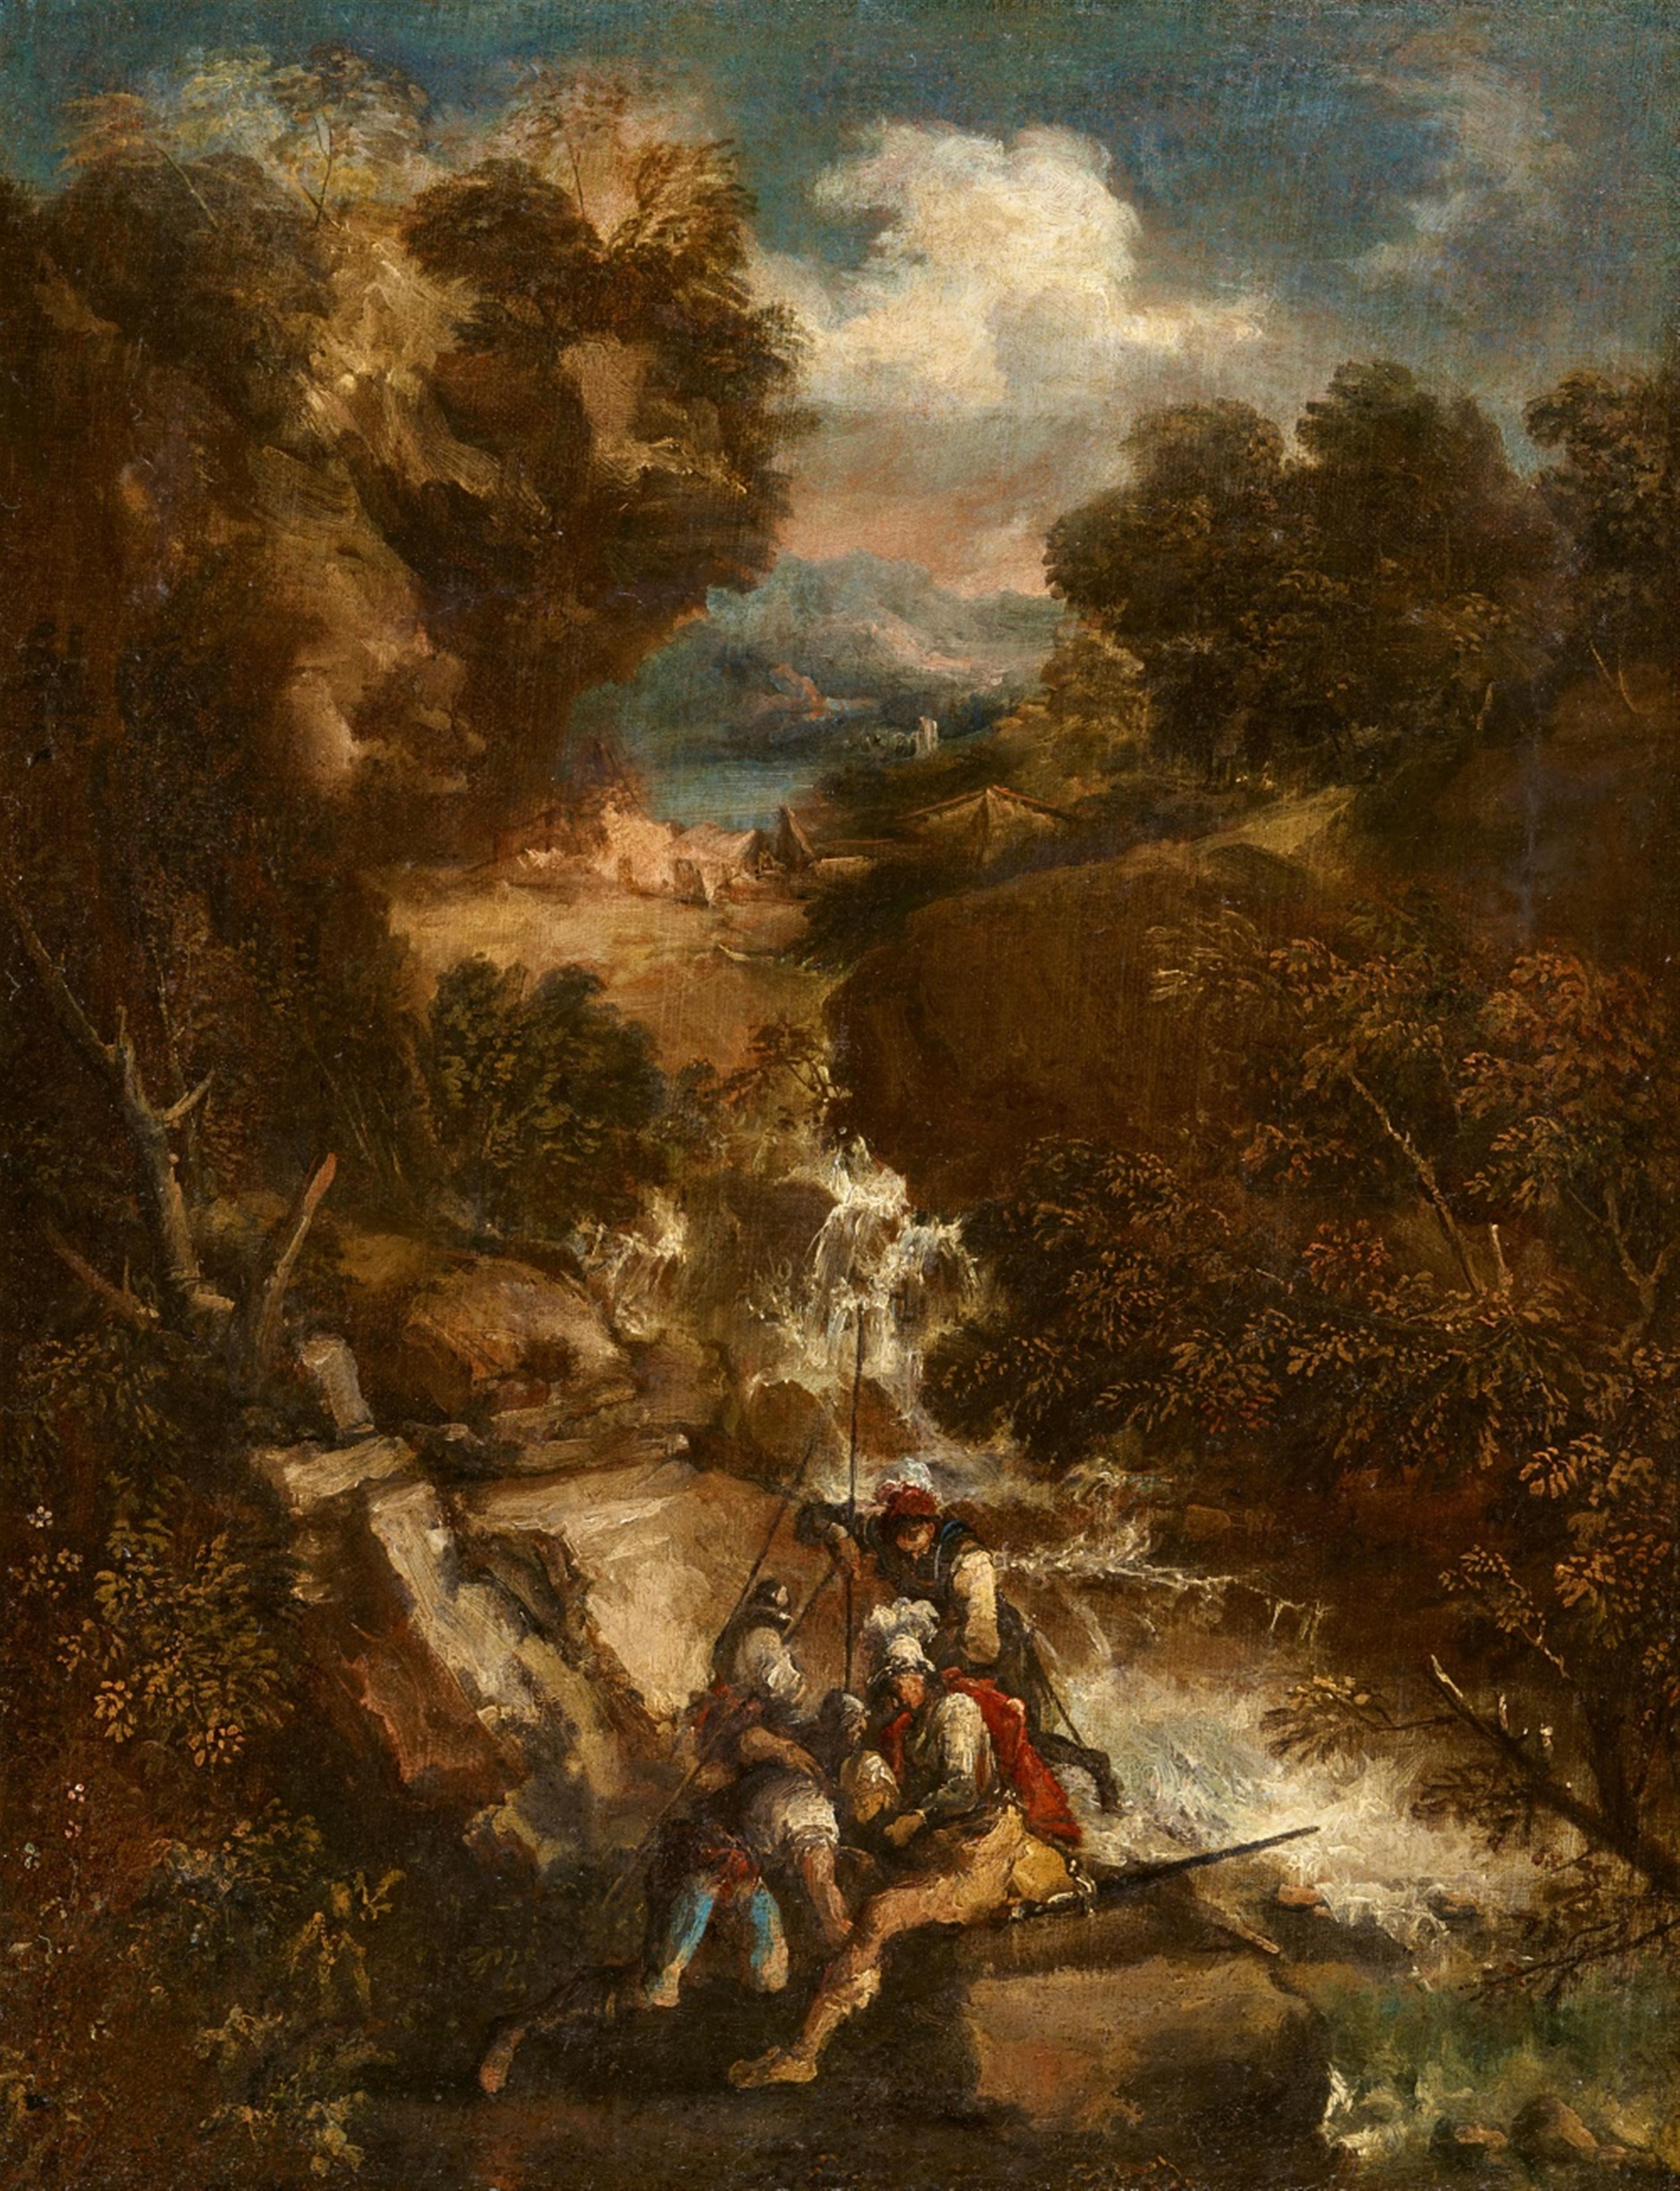 Antonio Maria Marini - Wooded Landscape with a Waterfall and Soldiers - image-1